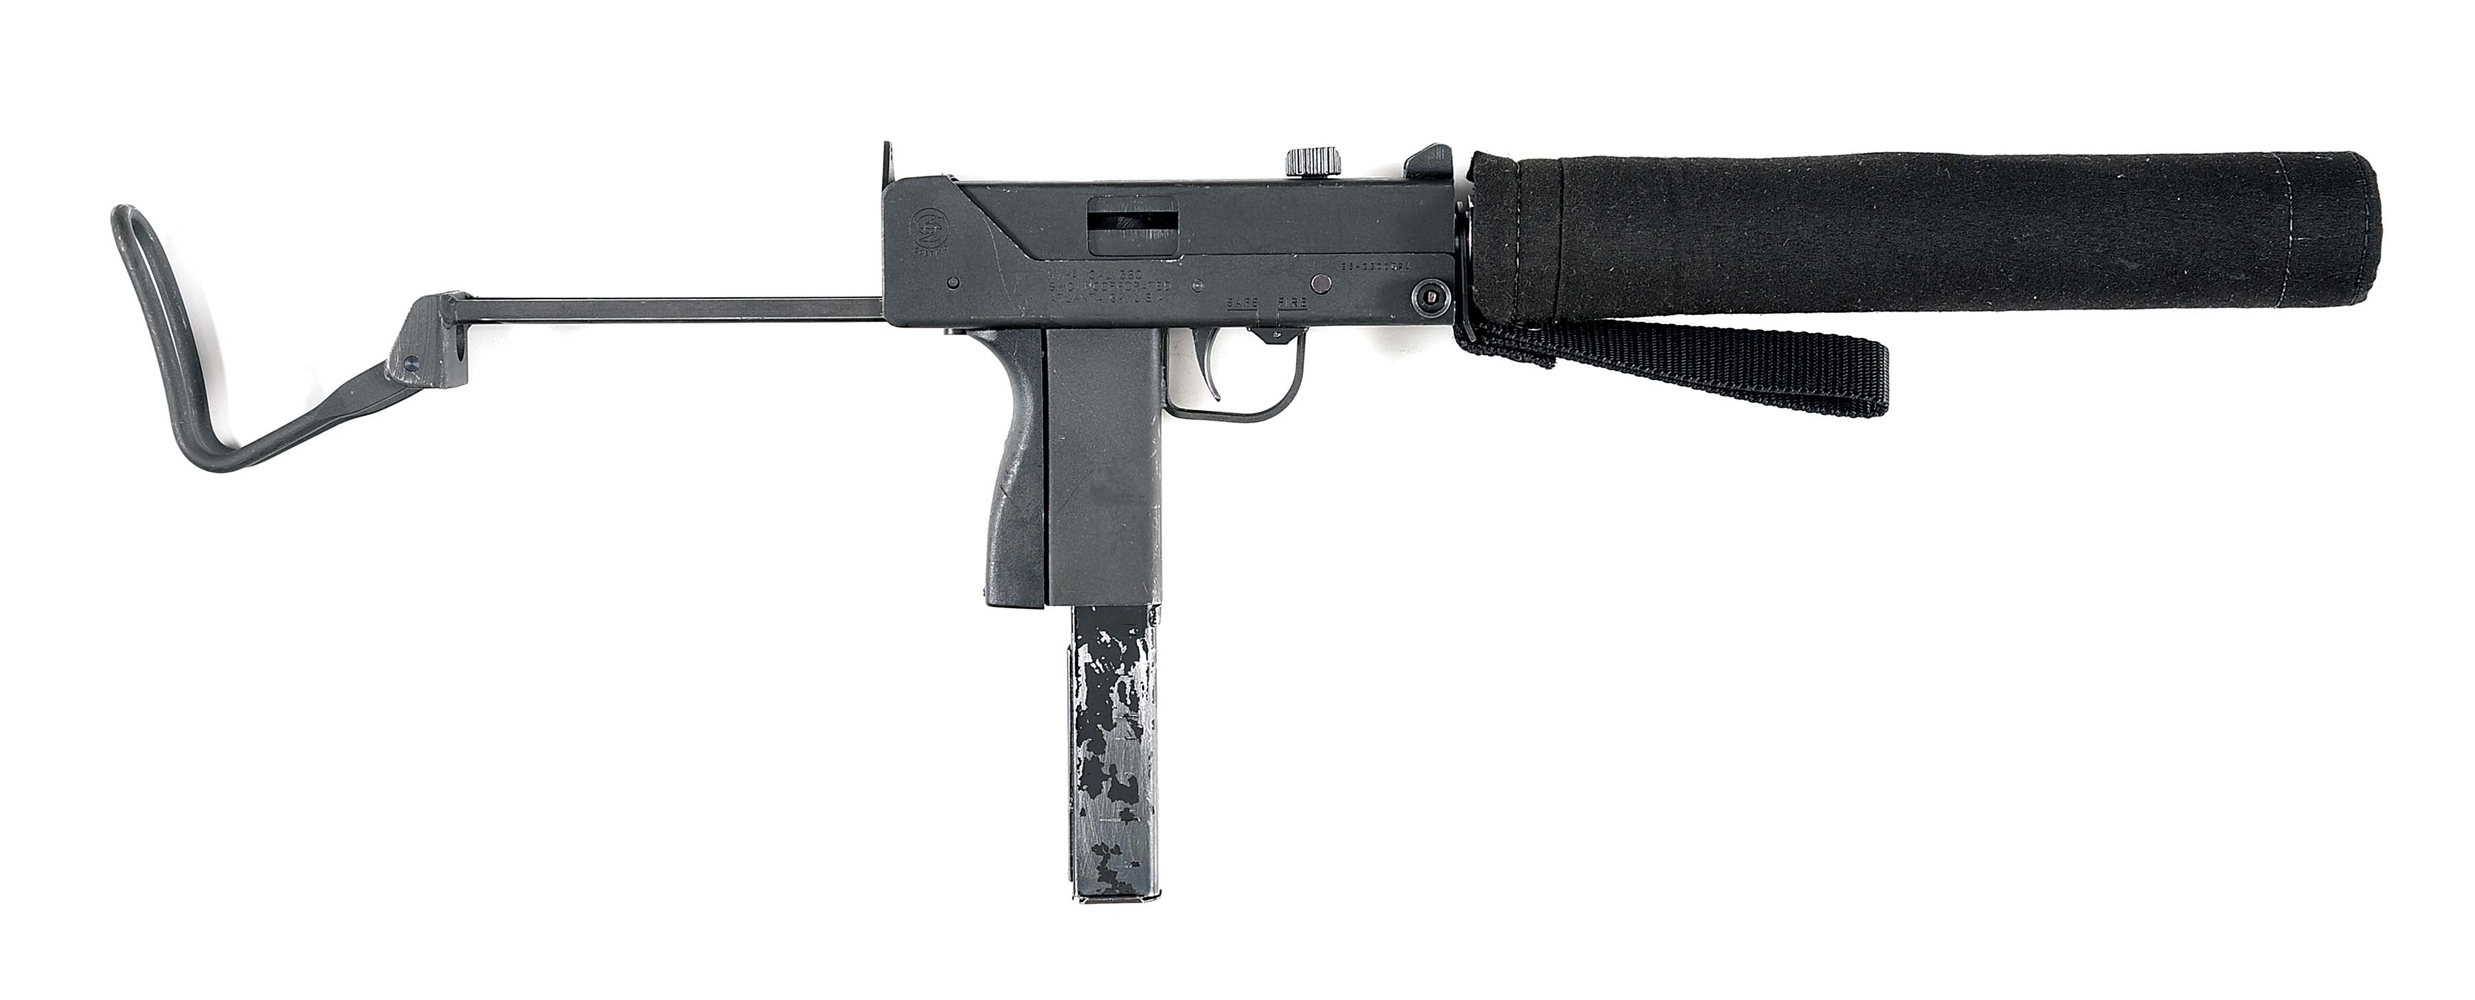 (N) ALWAYS POPULAR SWD COBRAY M11A1 SUBMACHINE GUN WITH J.P. MCINENLY .380 ACP M-11 SUPPRESSOR (FULLY TRANSFERABLE).